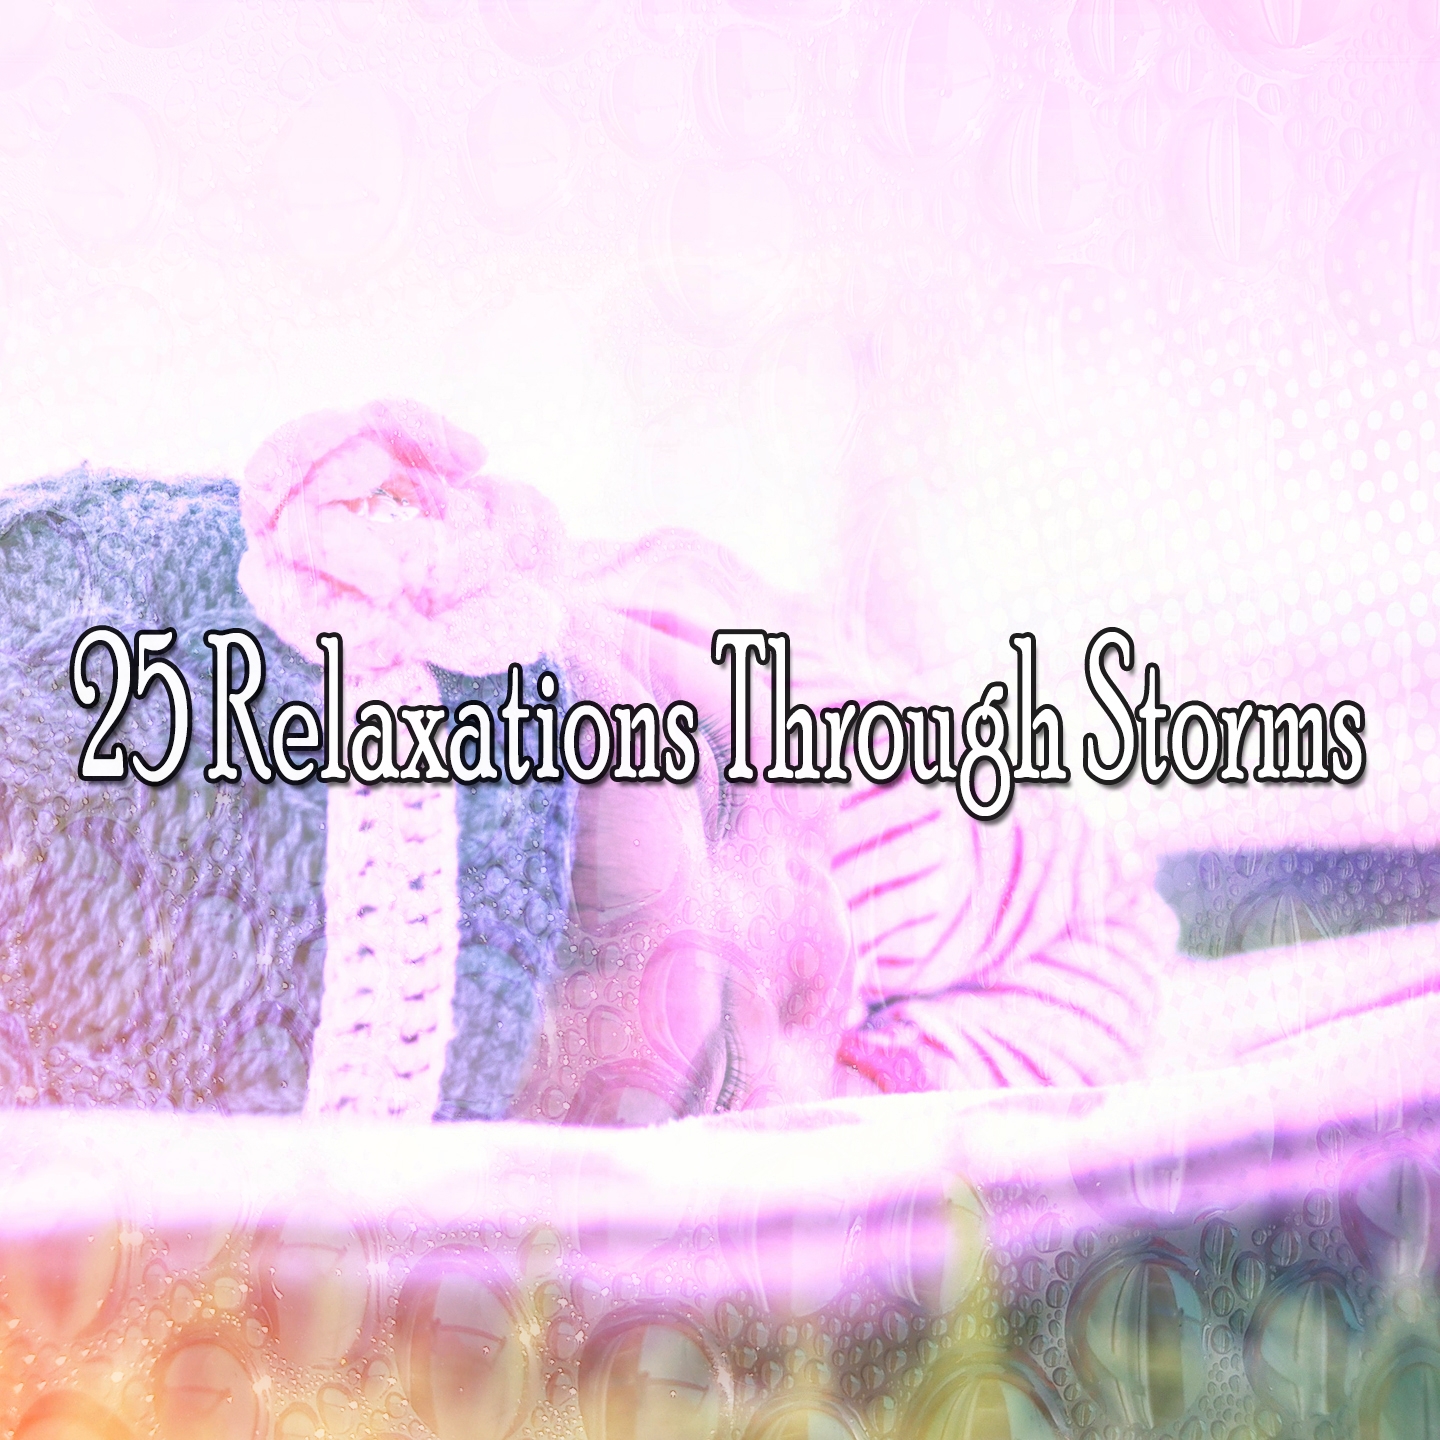 25 Relaxations Through Storms